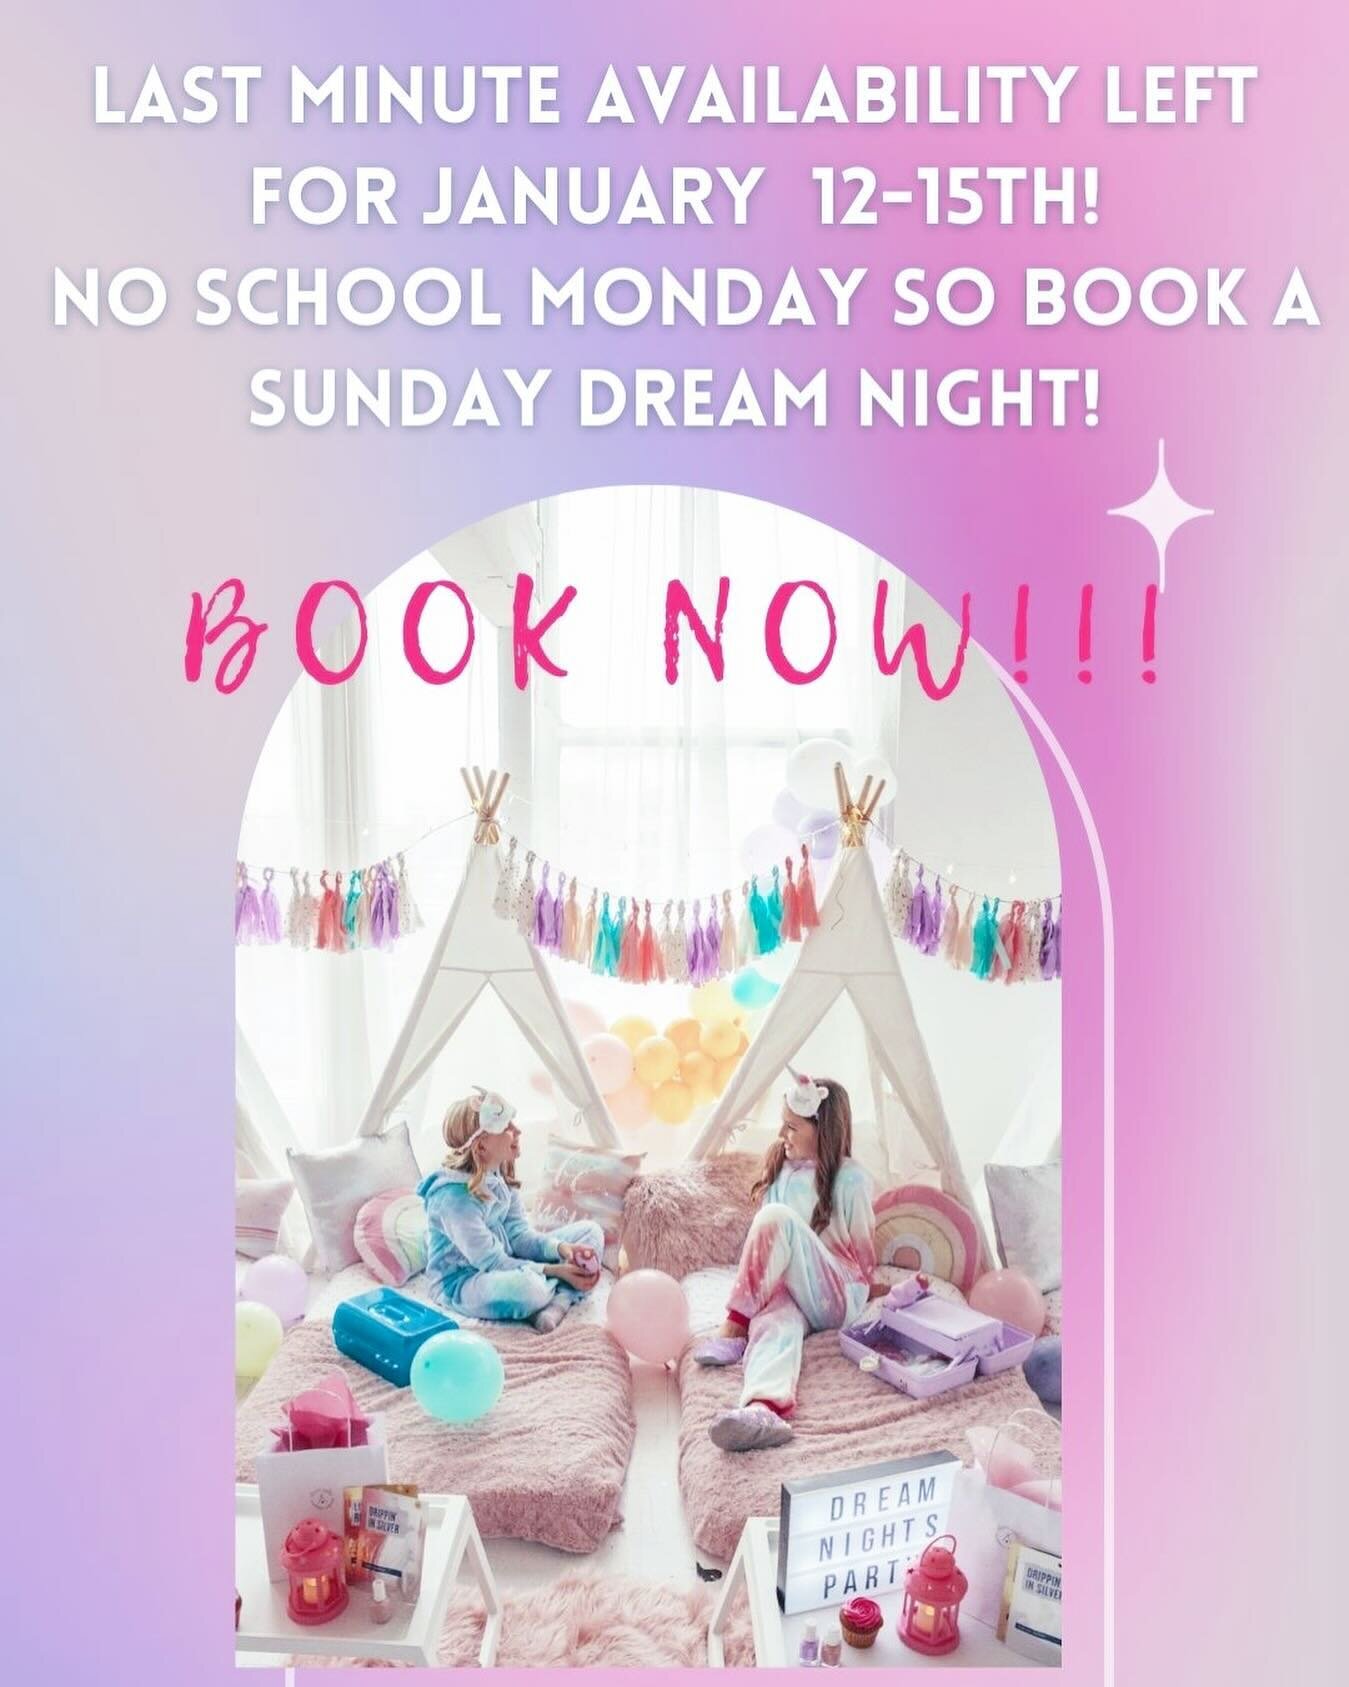 Looking for a way to create EPIC memories during a long holiday weekend? 🩷 We are sold out for most of January, but can squeeze in a few last minute DREAM NIGHTS 1/12-1/15th! 
.
.
.
.

 #winterpartyideas #indoormovienight #dreamy #dreamnightsslumber